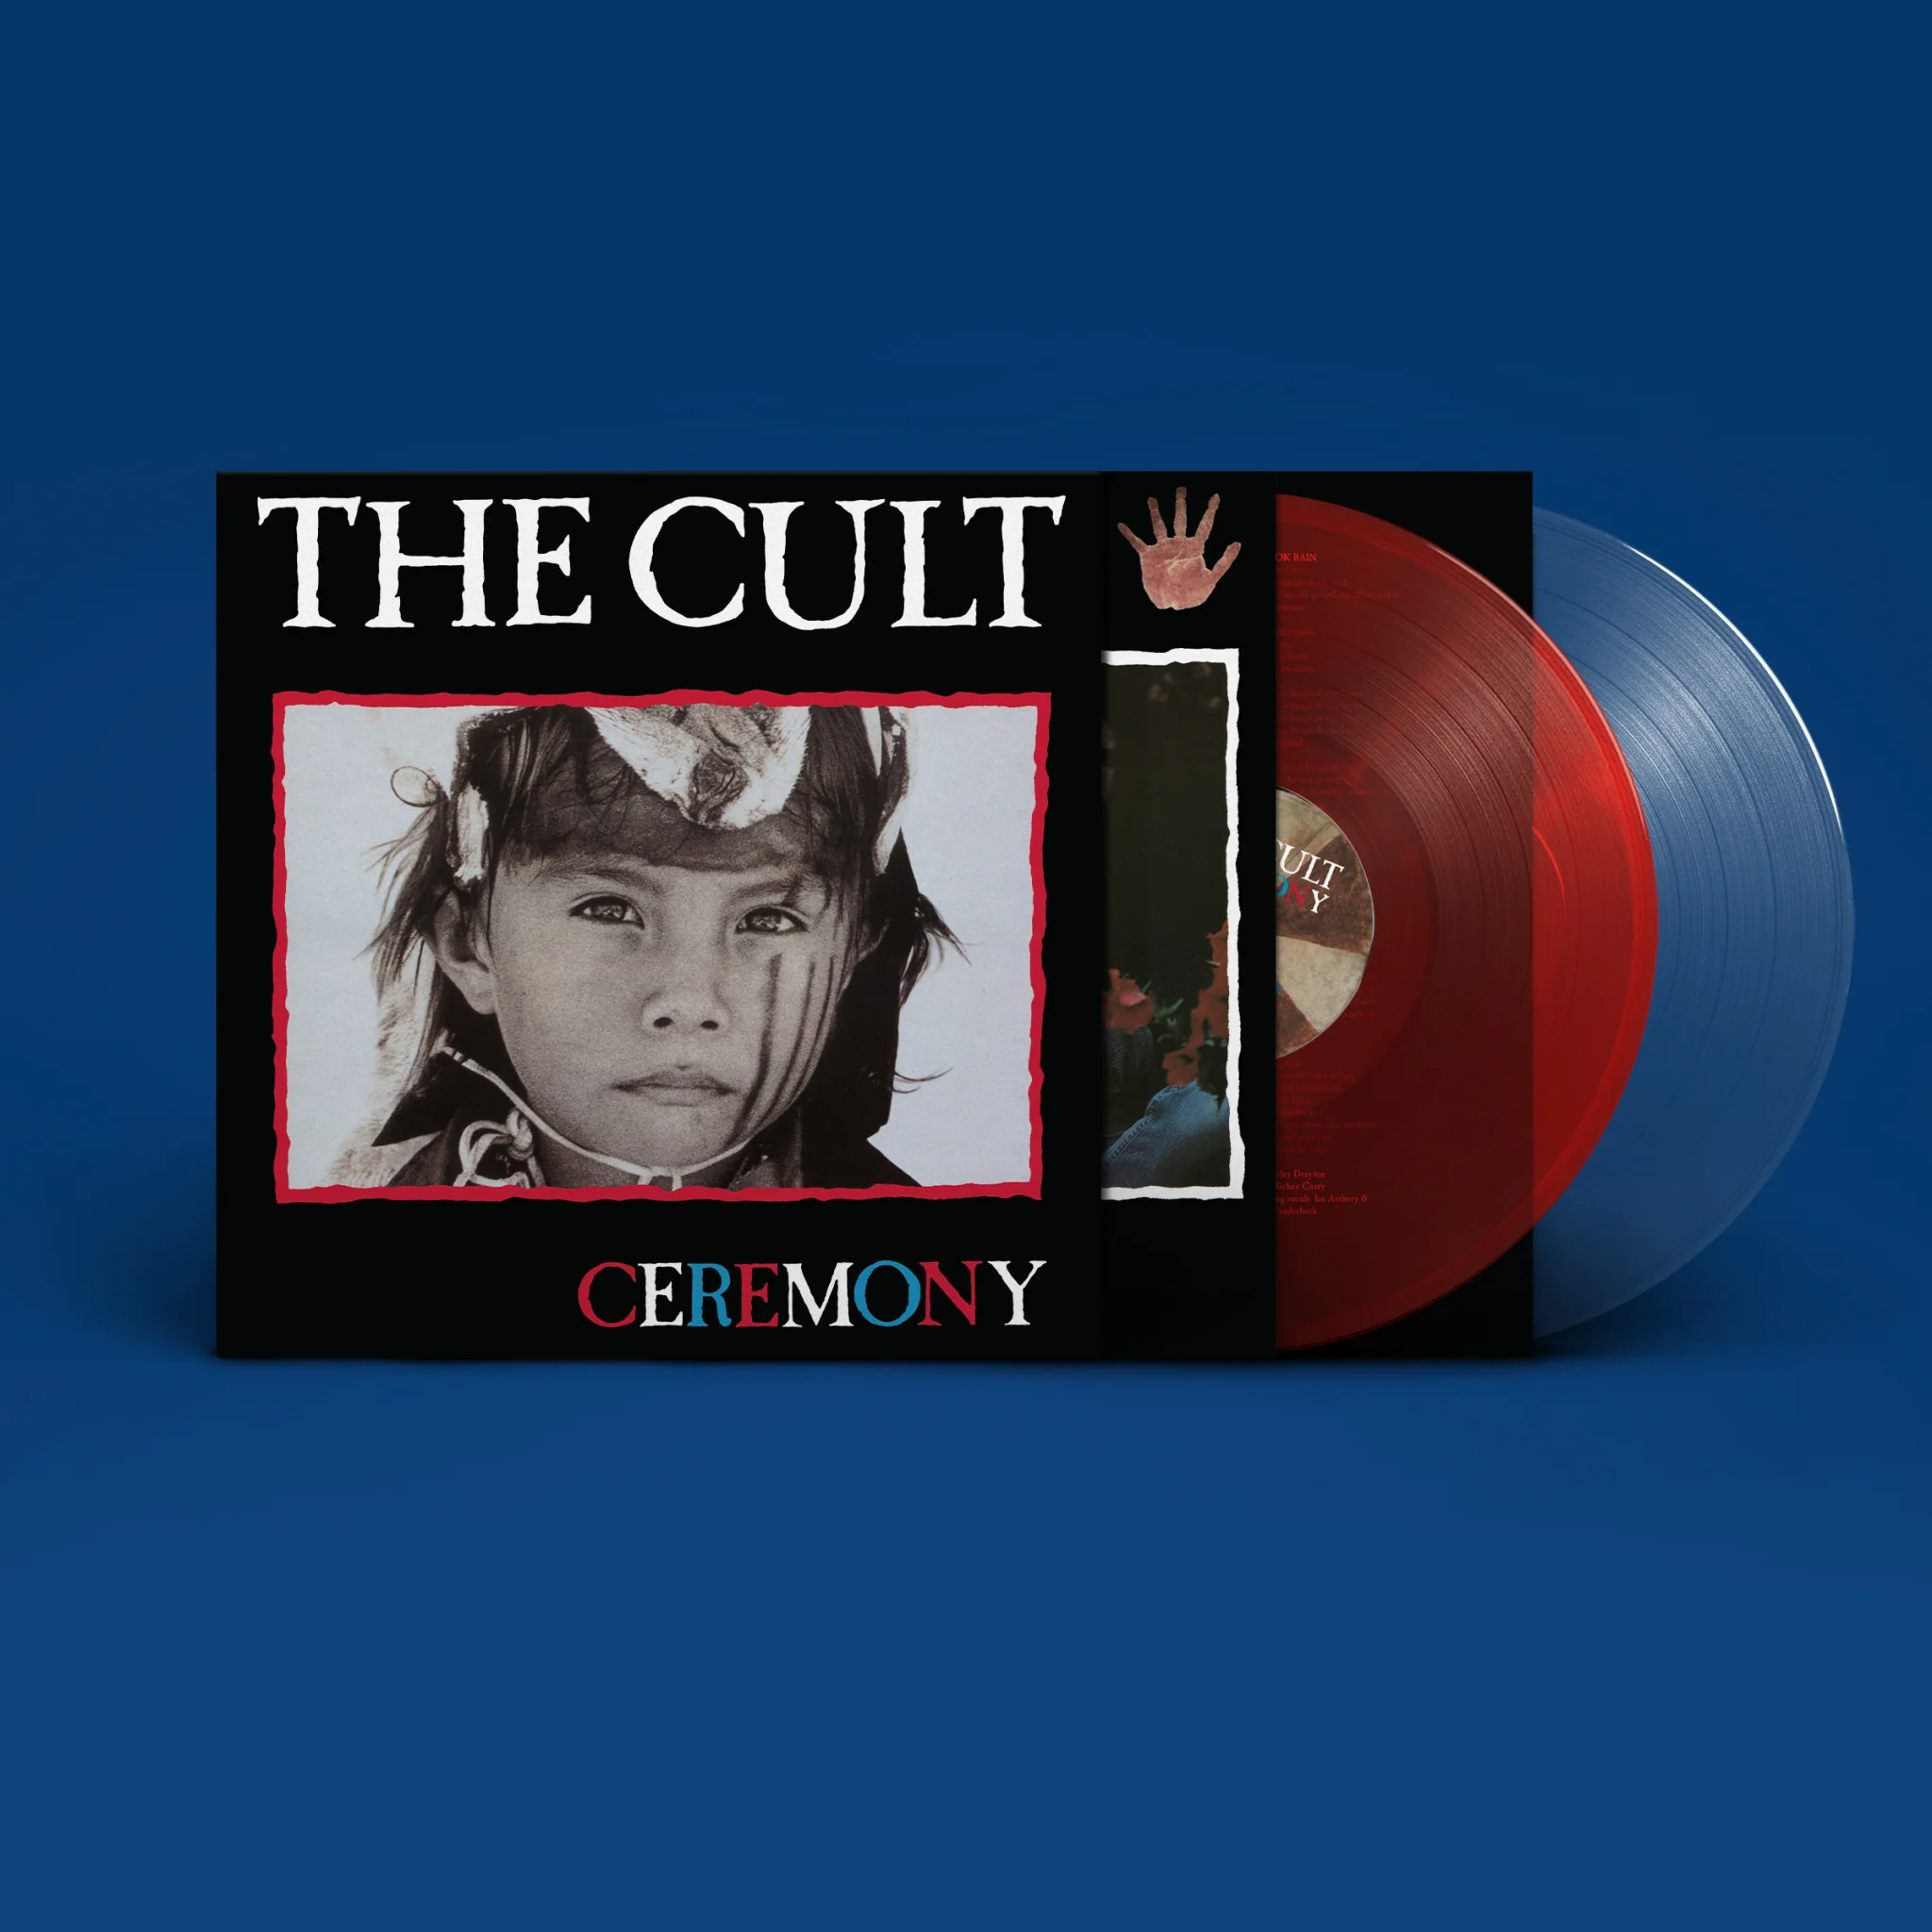 The Cult "Ceremony" 2LP 🔴🔵 Red/Blue